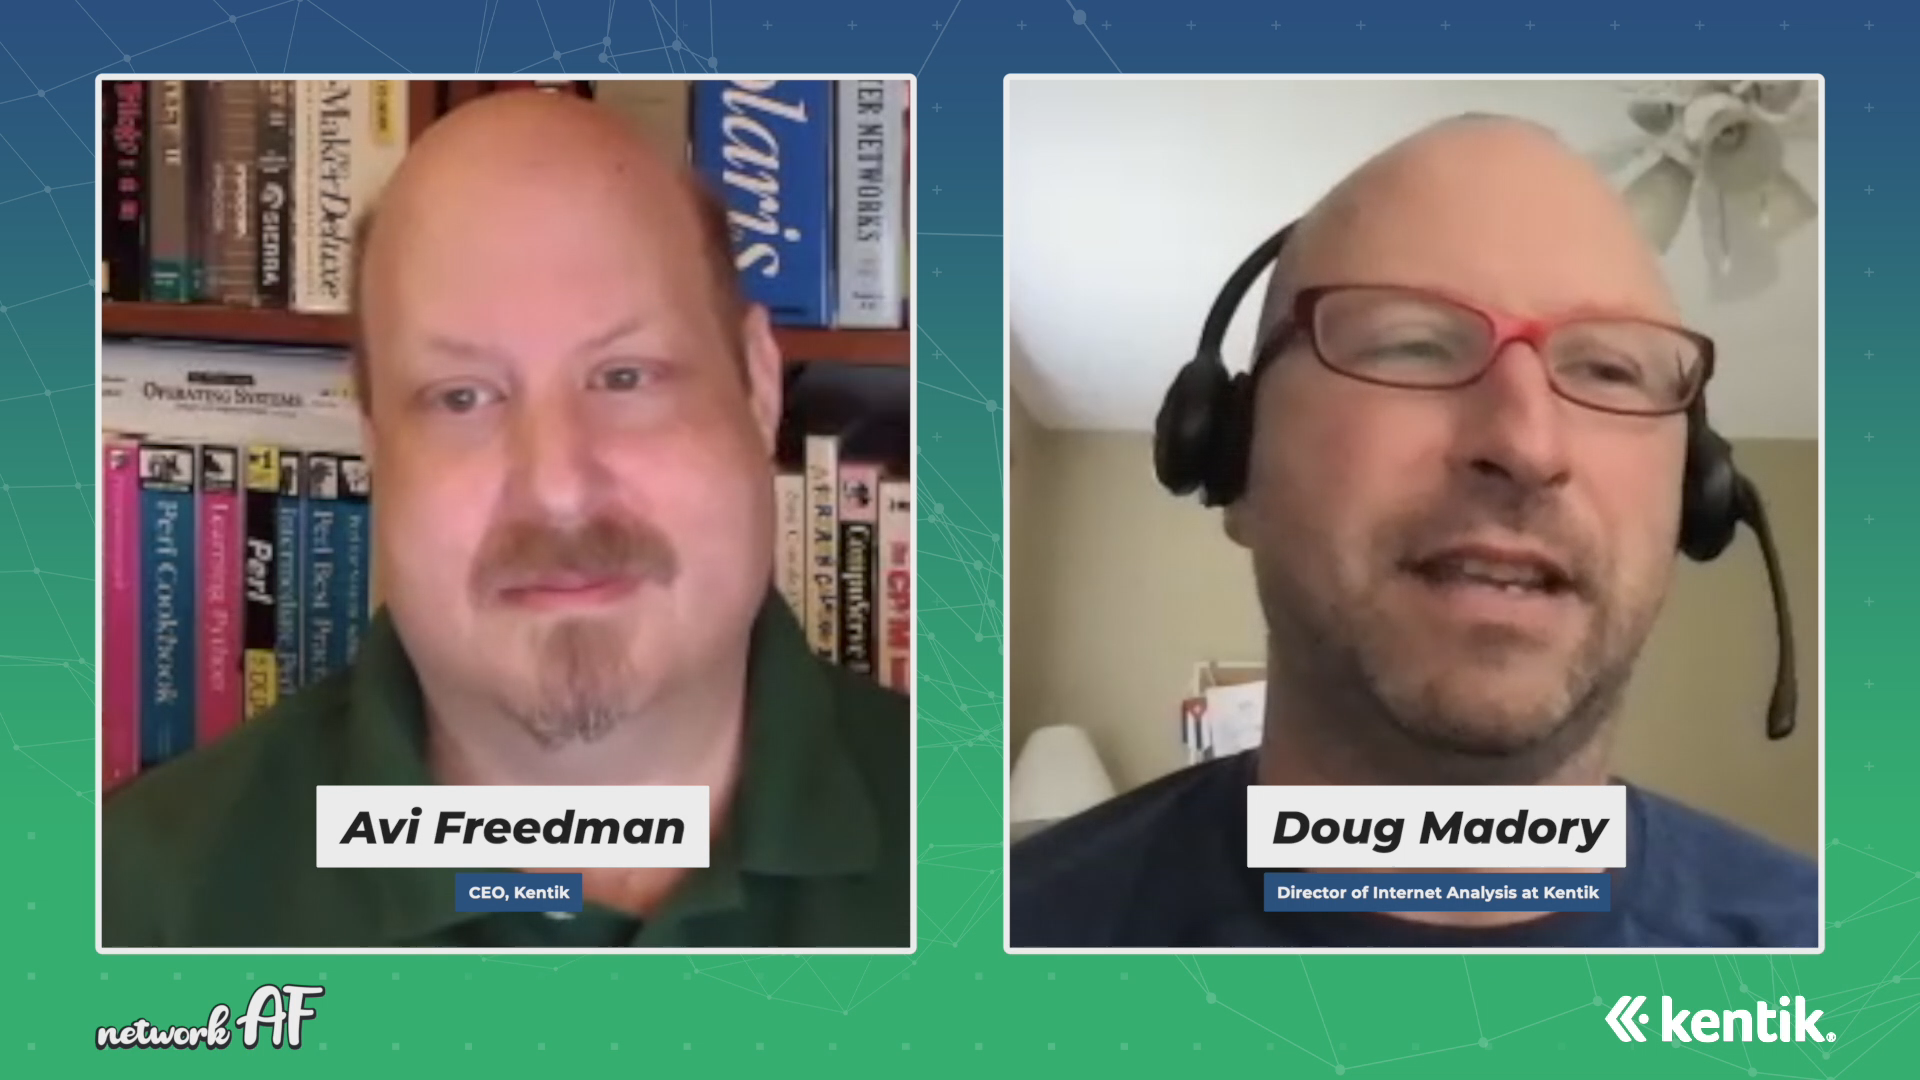 Building relationships as an internet analyst with Doug Madory